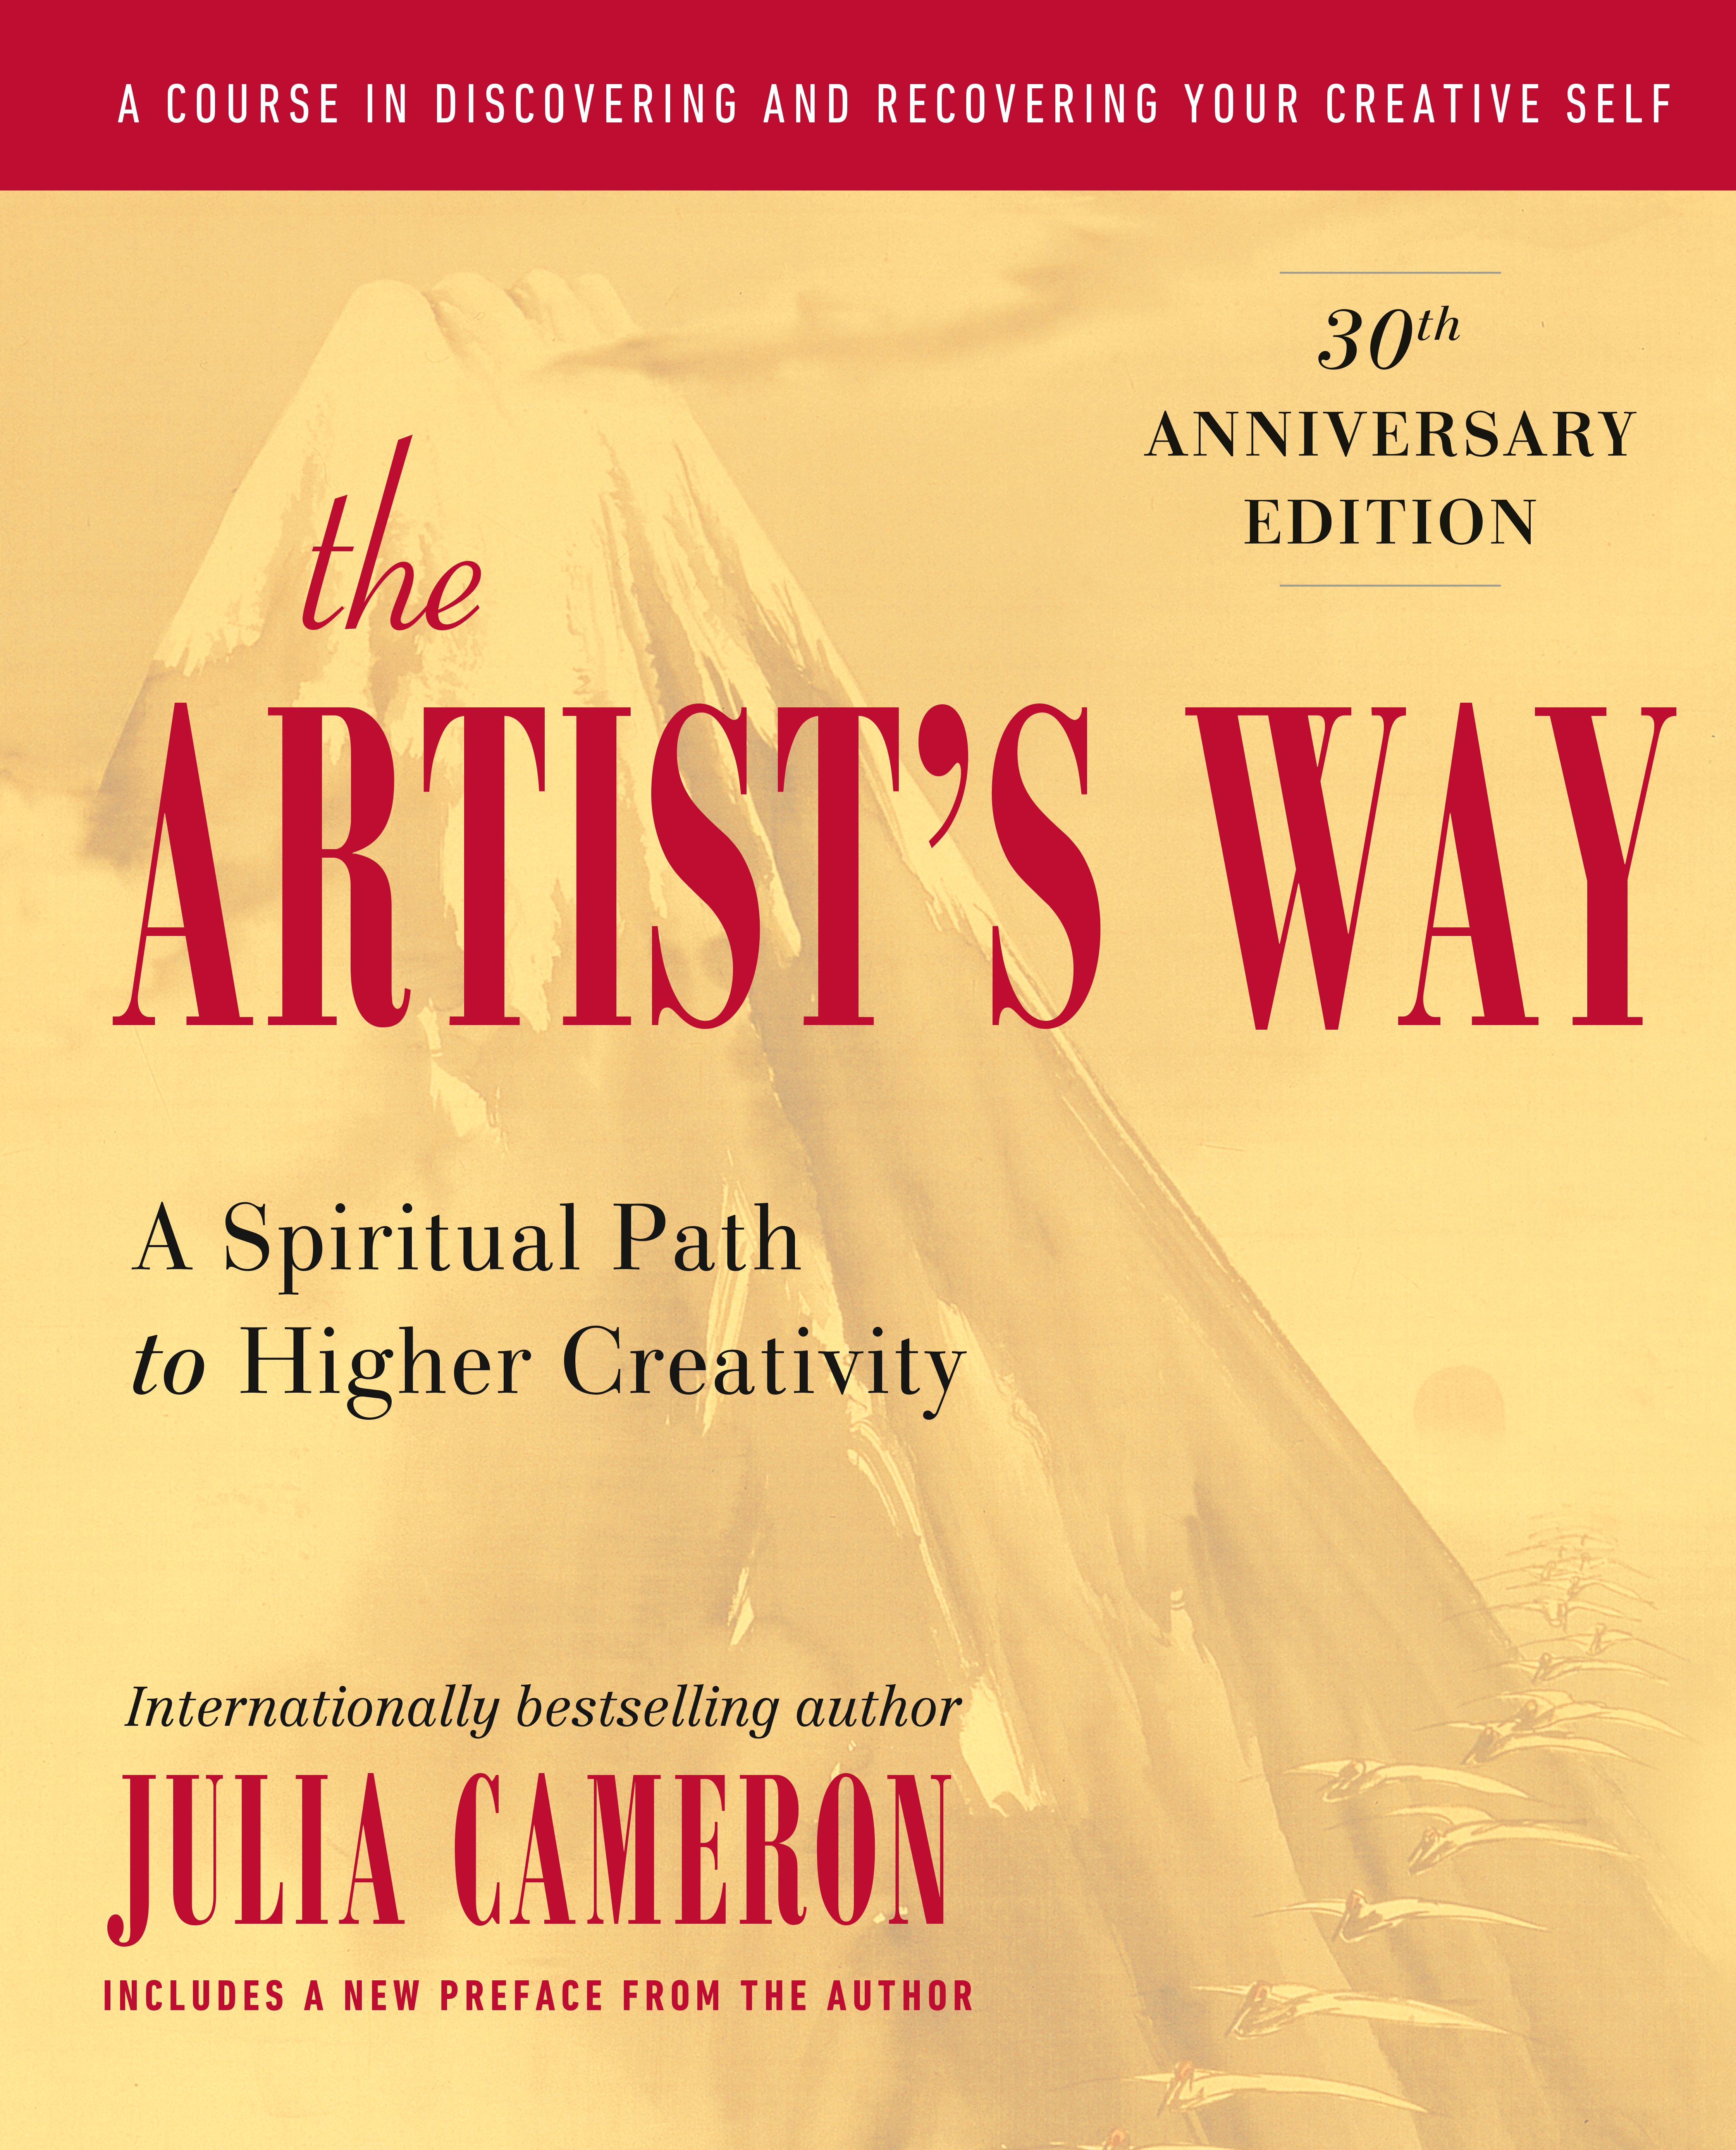 The Artists Way (Hardcover)